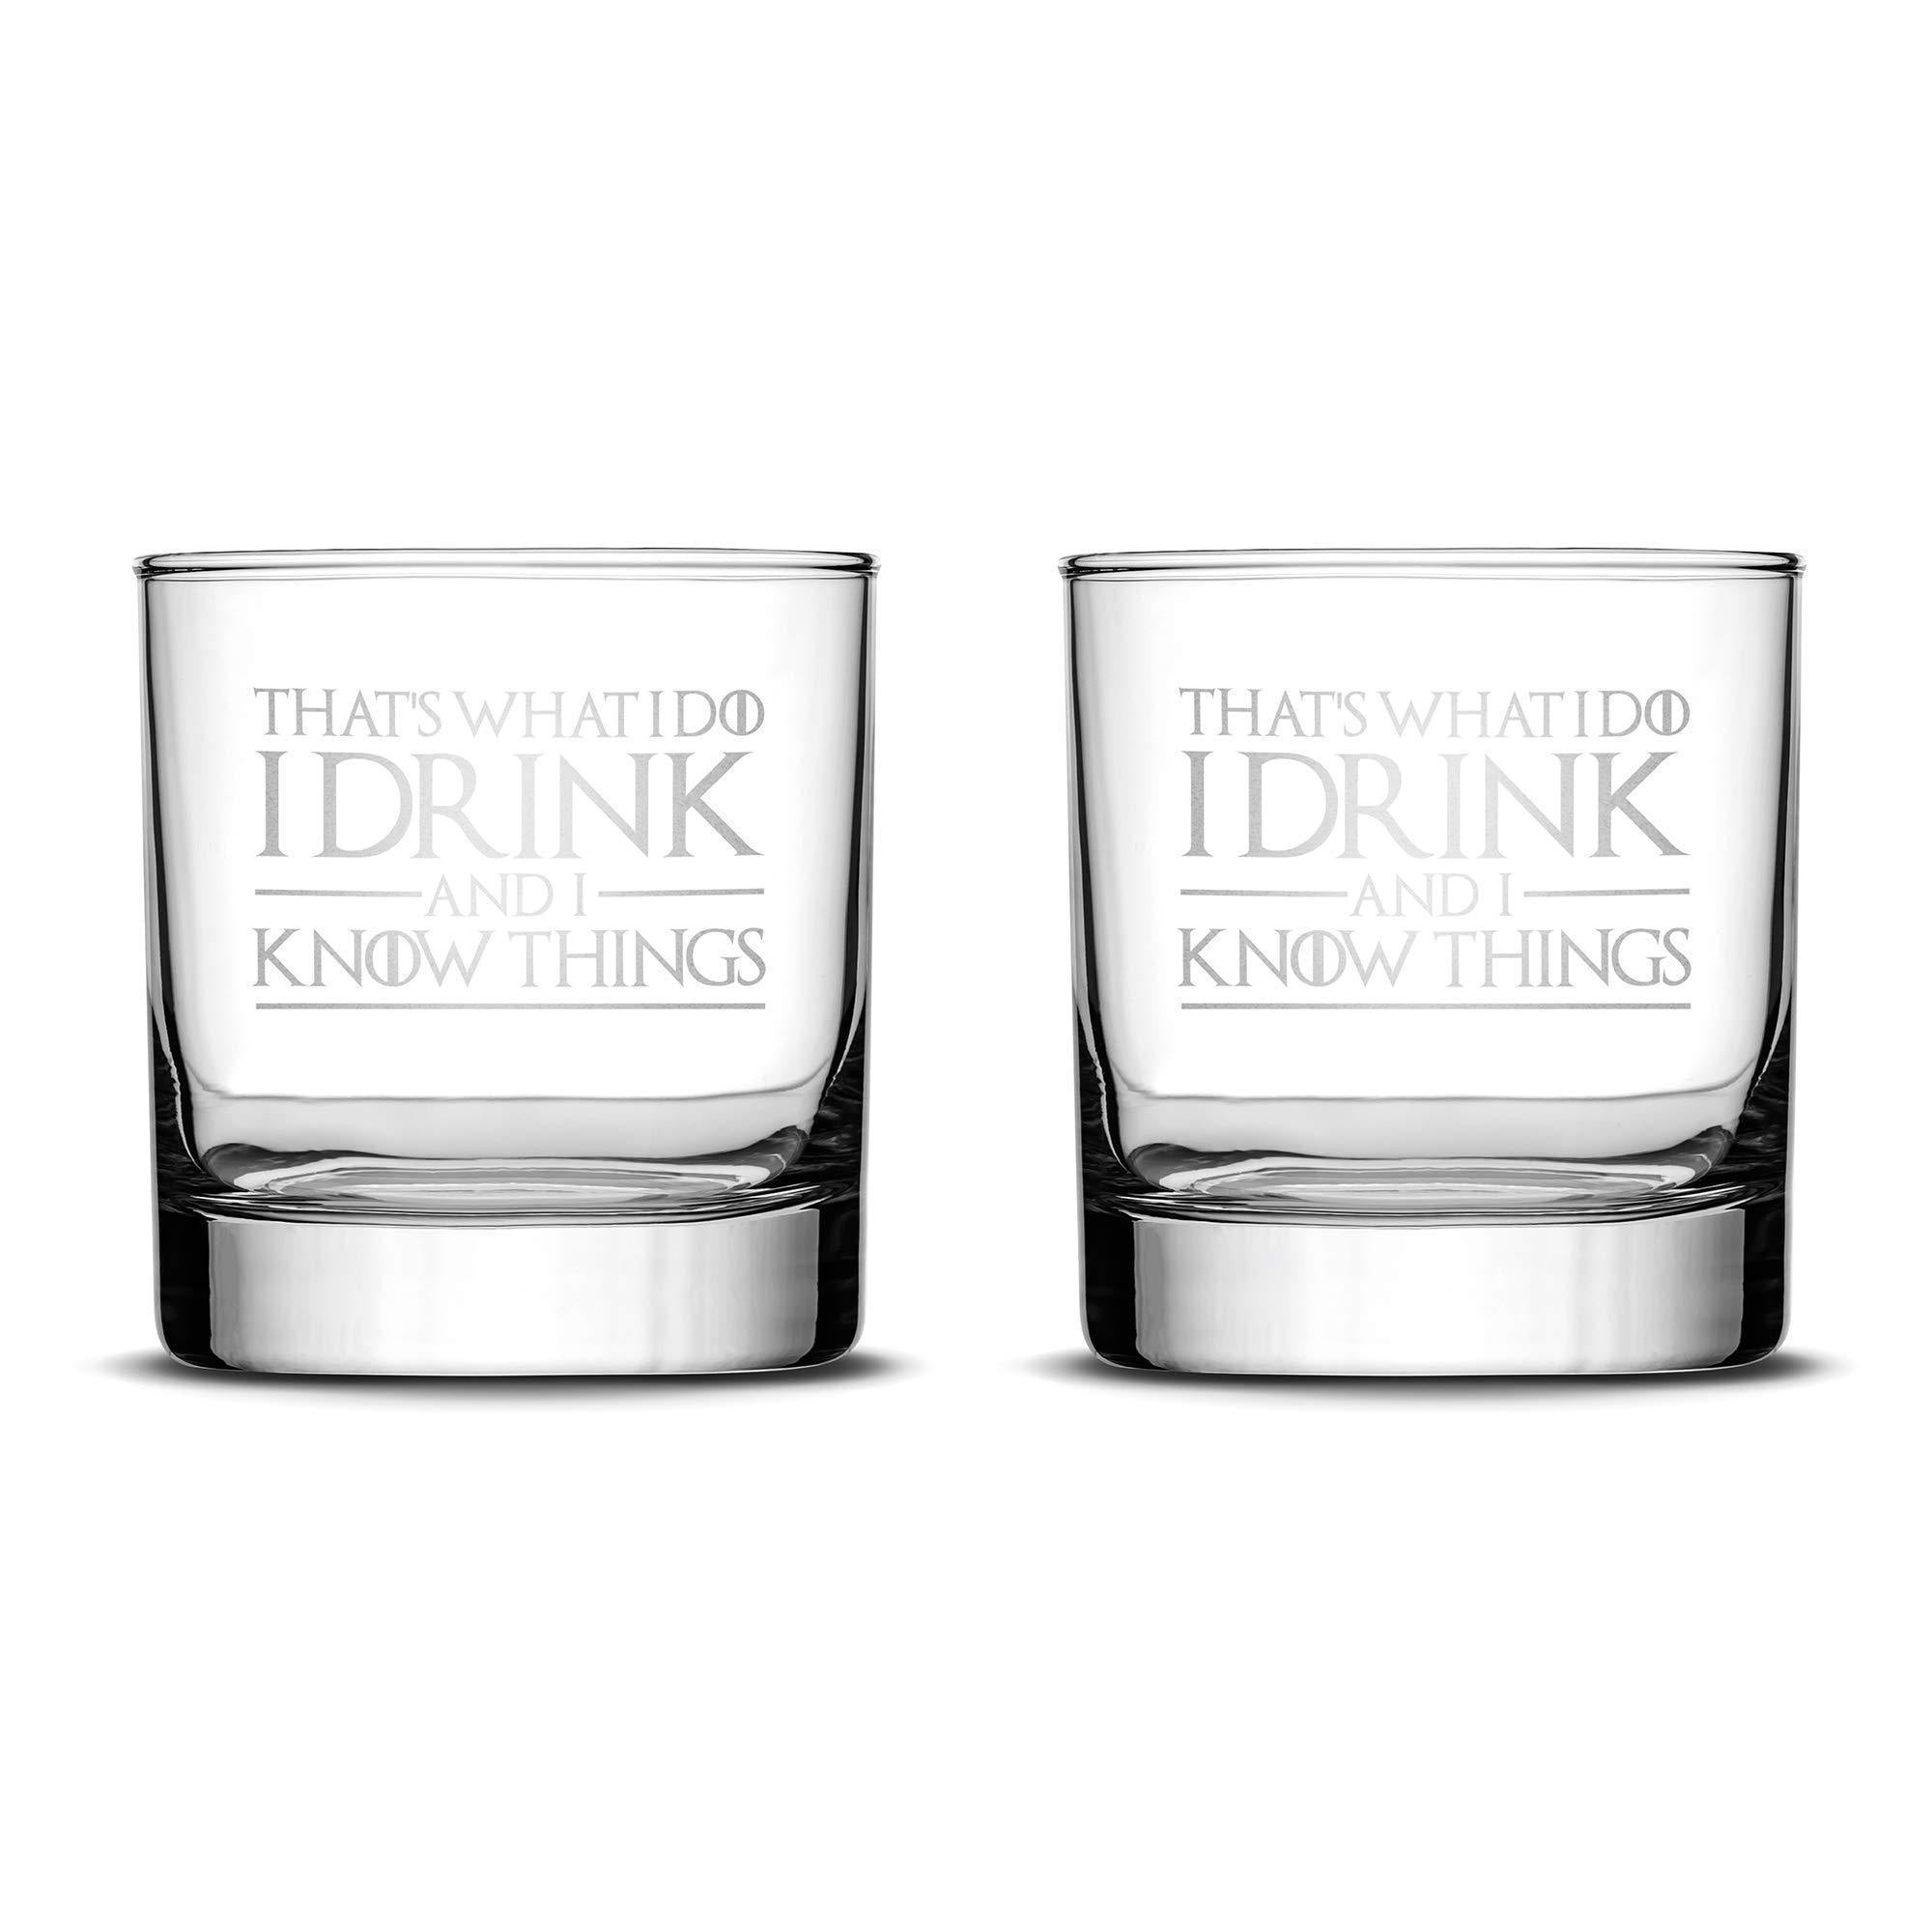 Premium Game of Thrones Whiskey Glasses, Set of 2, Thats What I Do I Drink and I Know Things Integrity Bottles